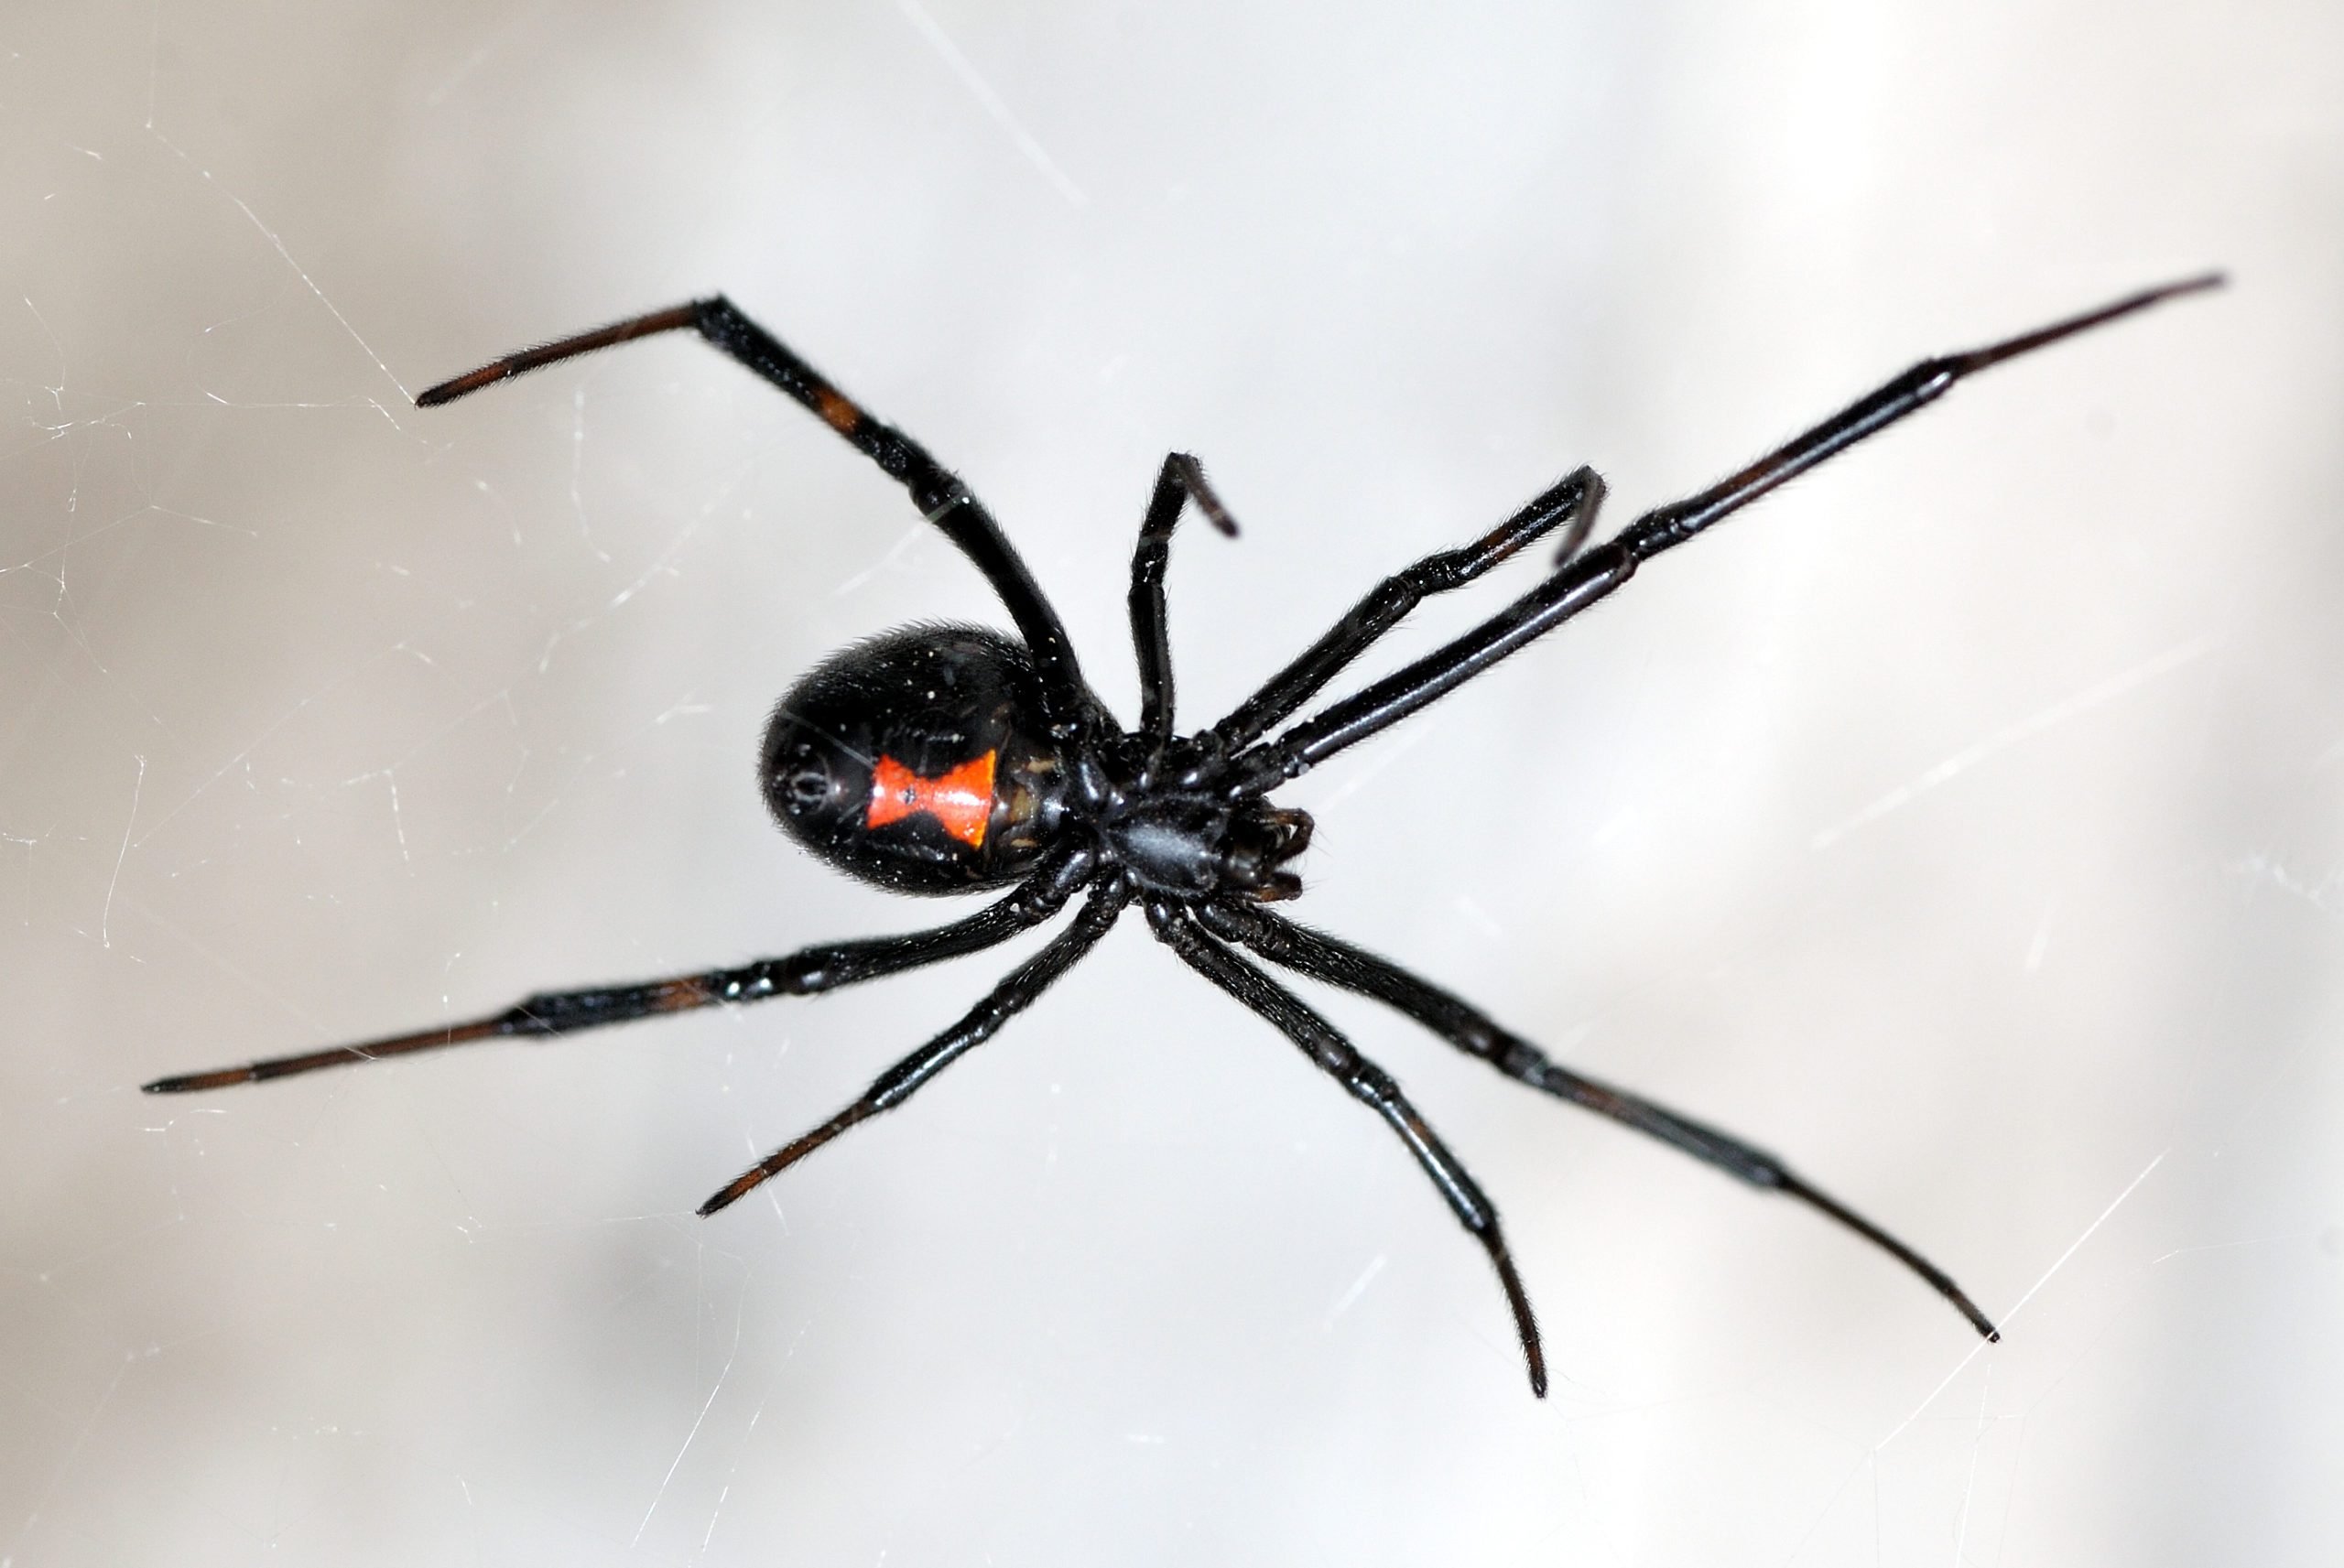 Black Widow Spider Bite Can Kill Pets if You Don't Act Fast